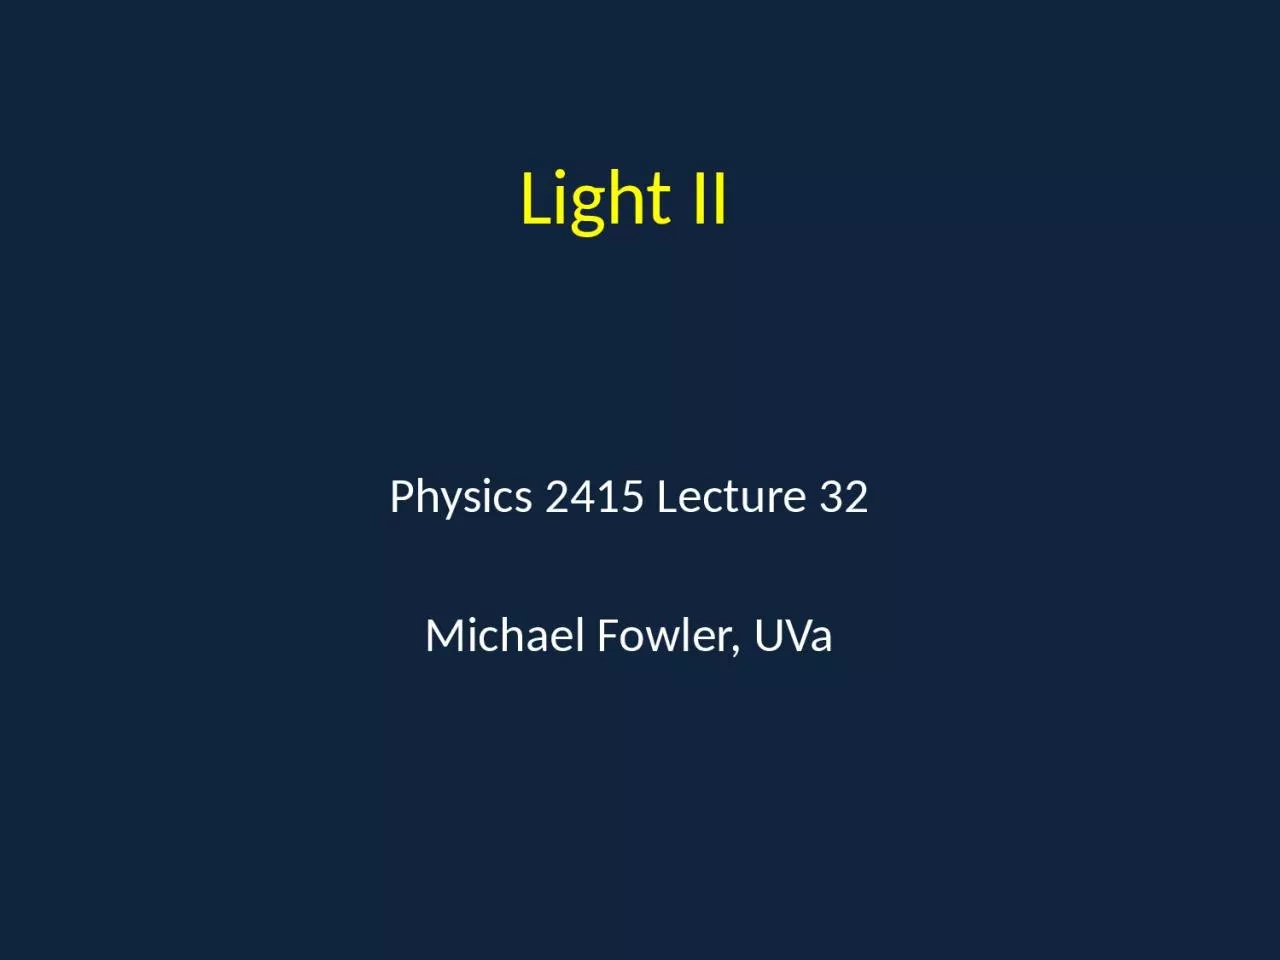 Light II Physics 2415 Lecture 32